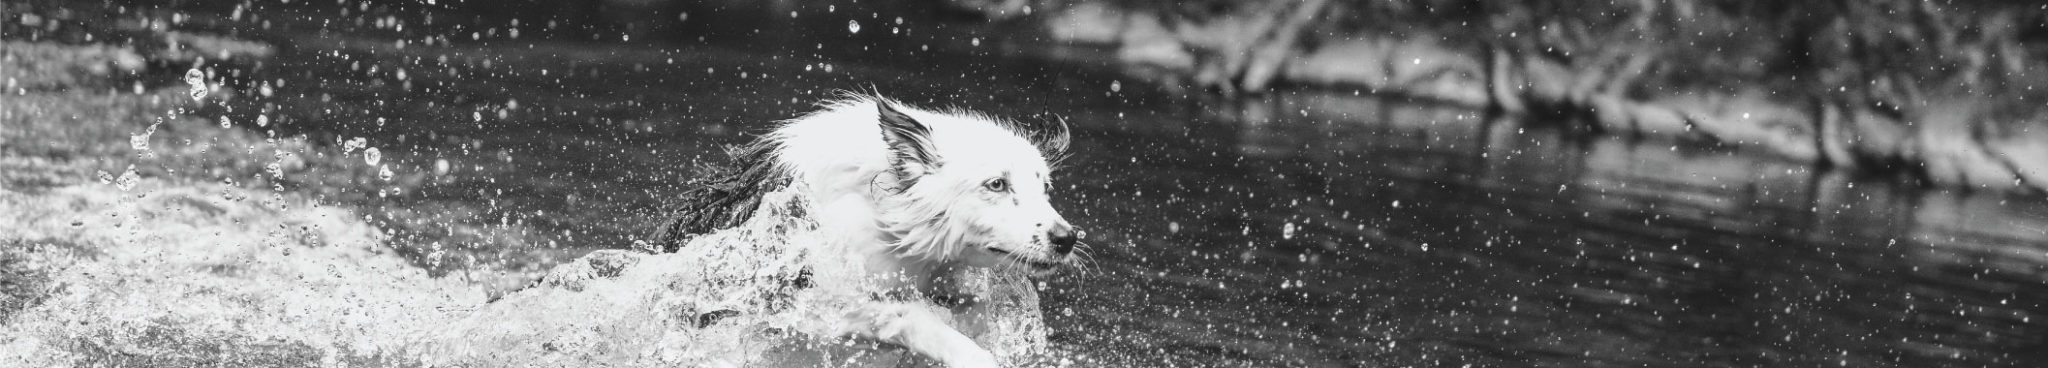 ORIJEN Fit & Trim Dog Food - White Collie running and splashing through the water - Envy from Pennsylvania